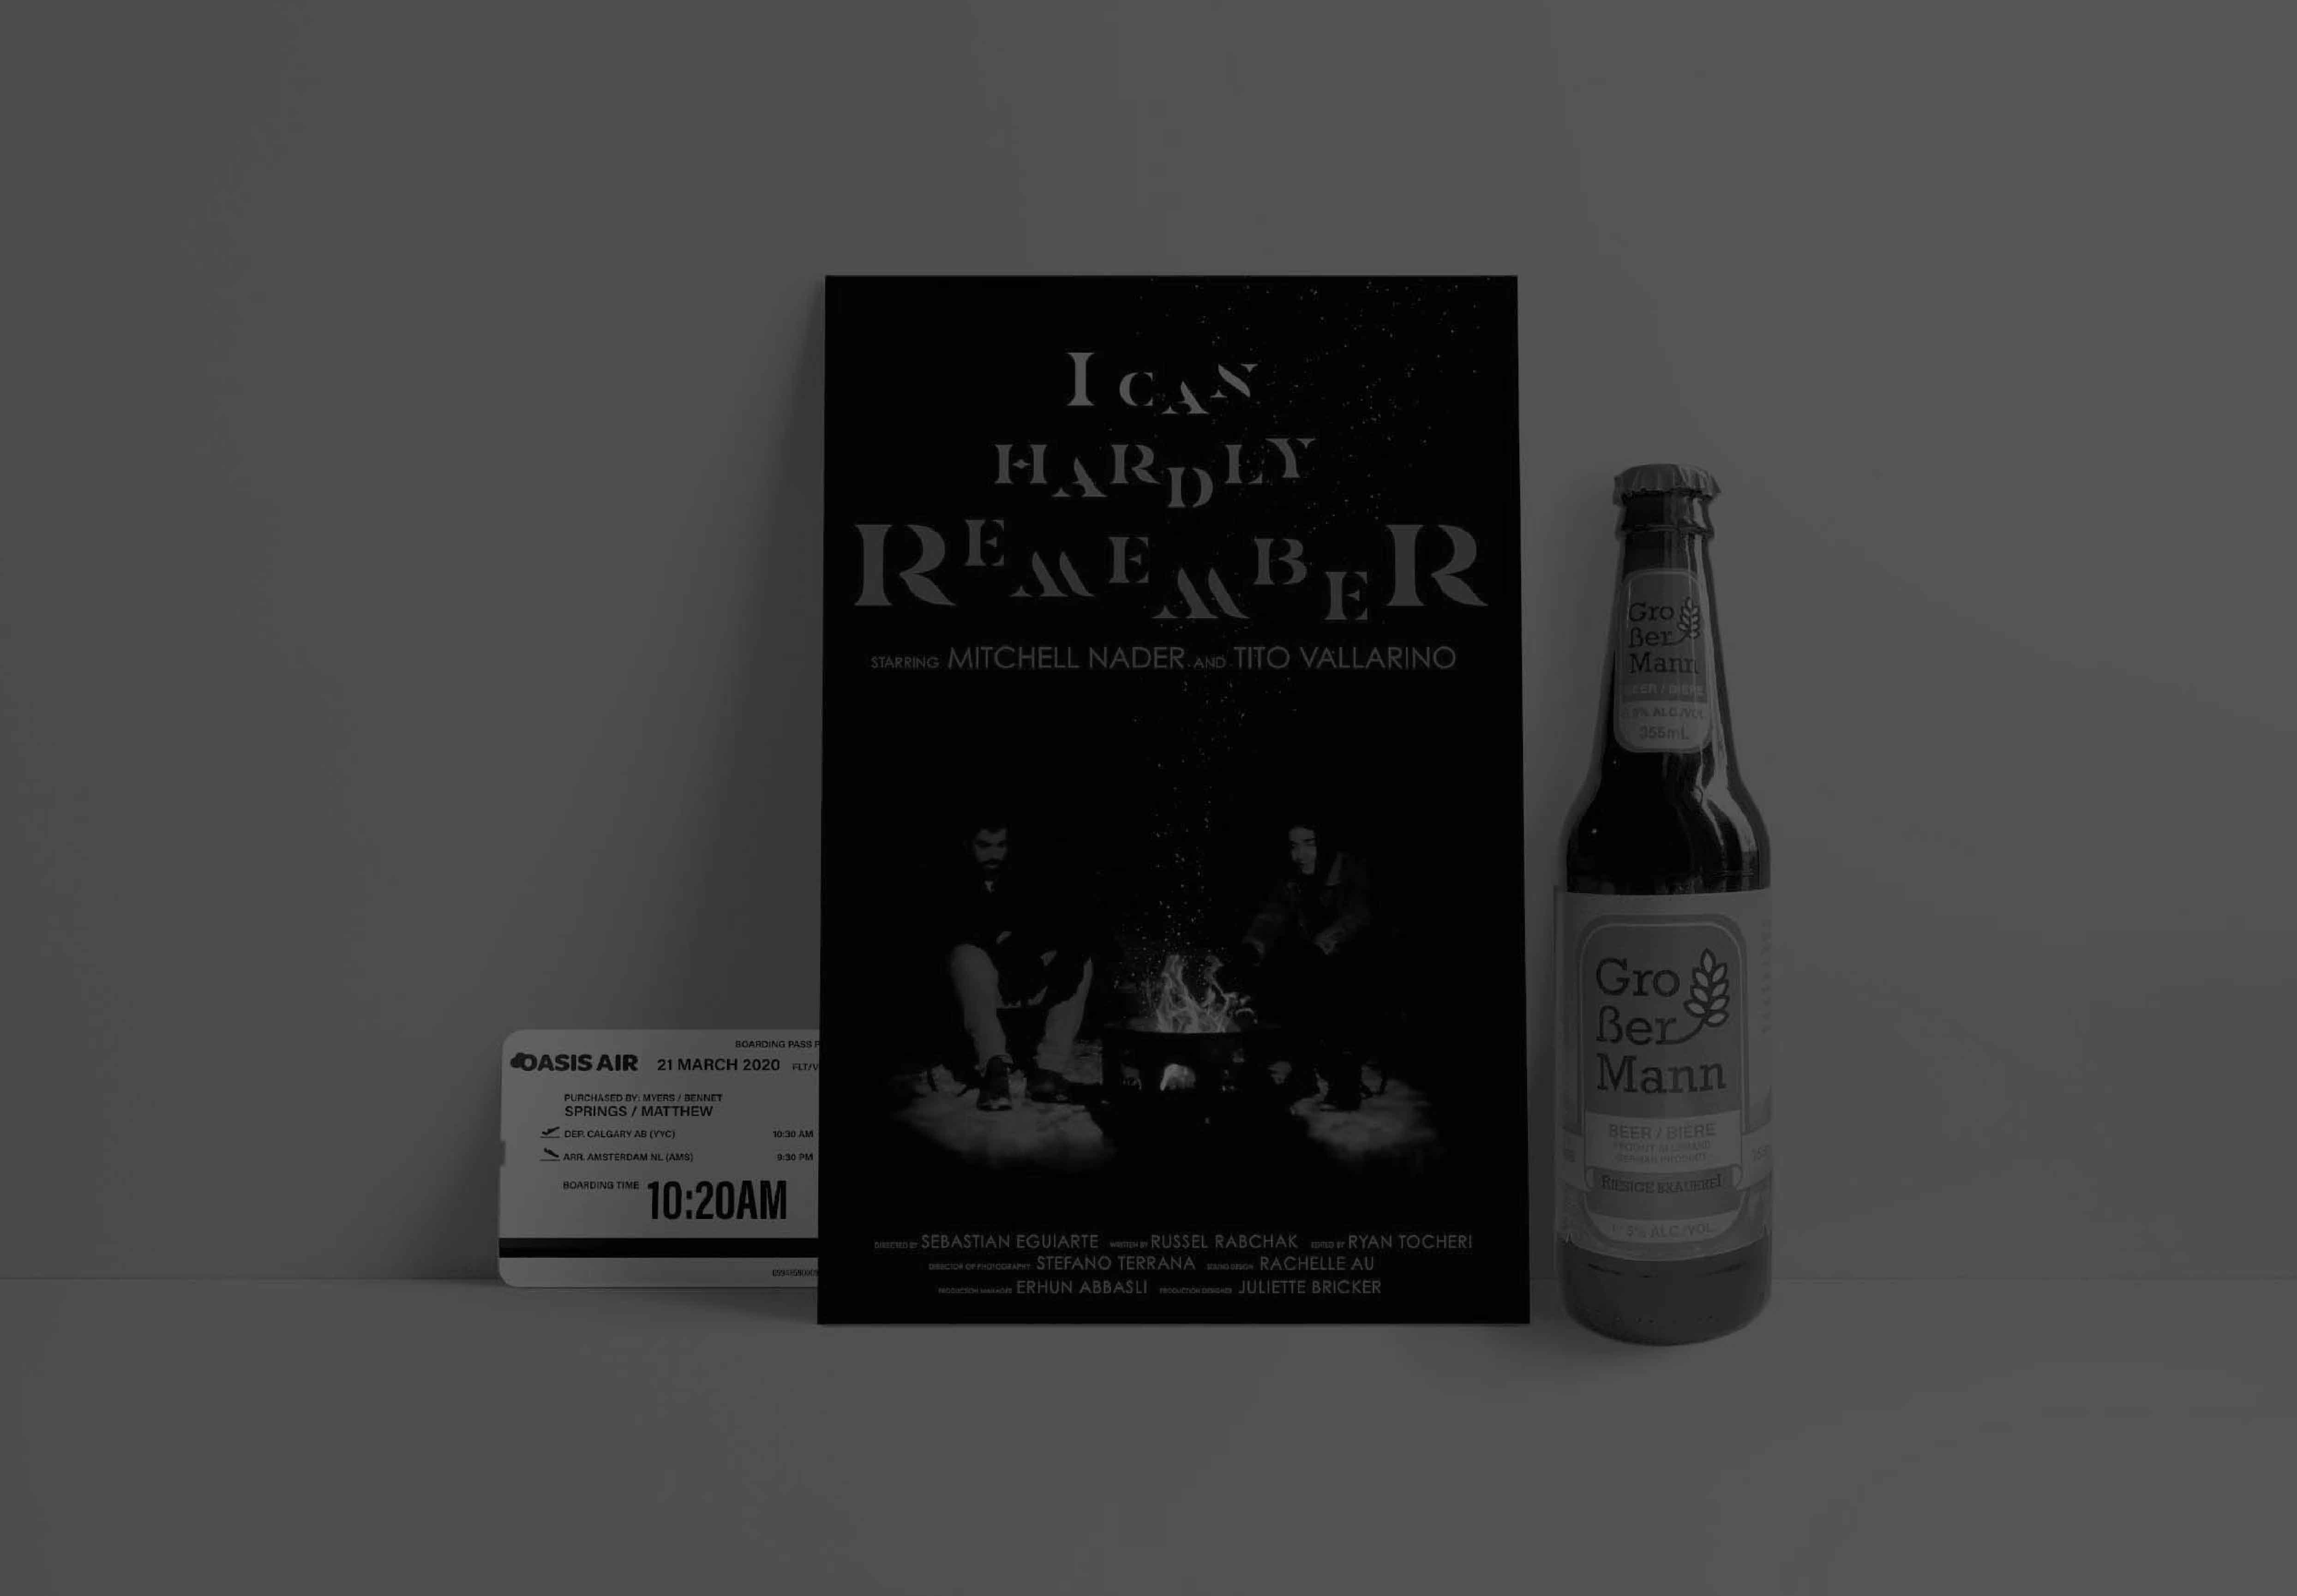 A dark movie poster of two guys sitting around a campfire and a plane ticket and beer bottle beside the poster